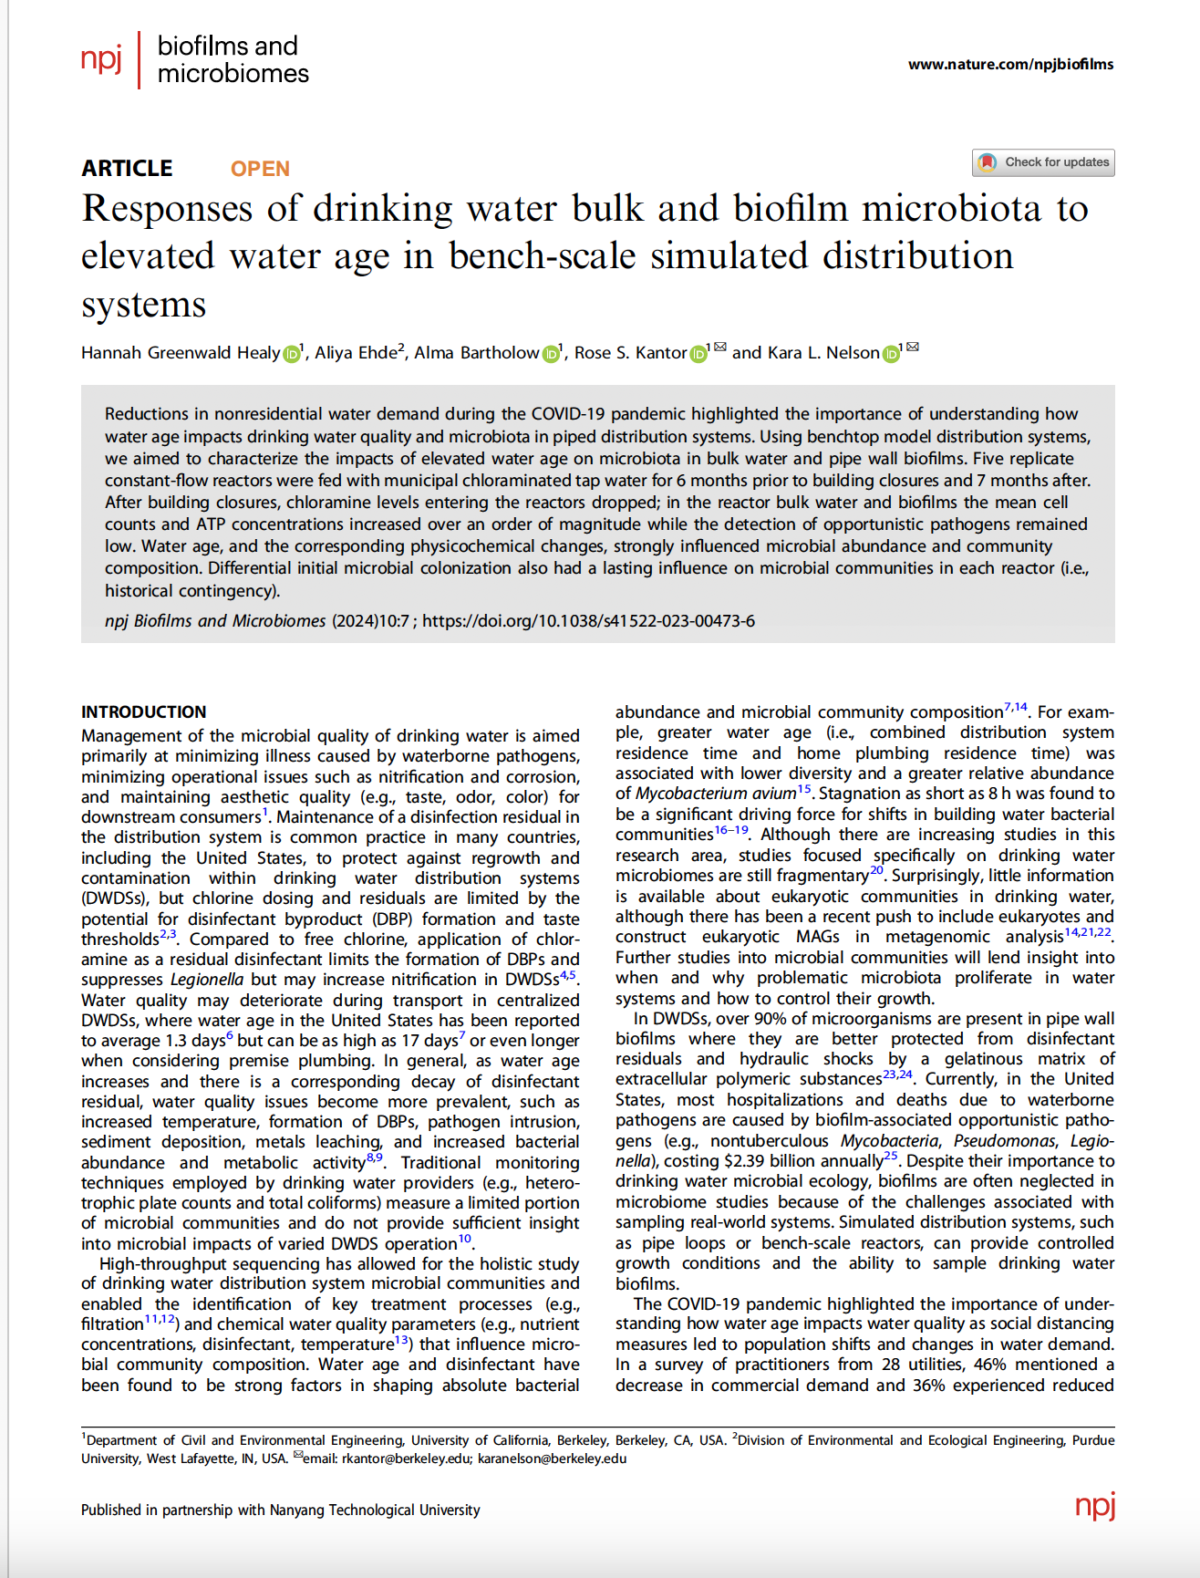 Responses of drinking water bulk and biofilm microbiota to elevated water age in bench-scale simulated distribution systems